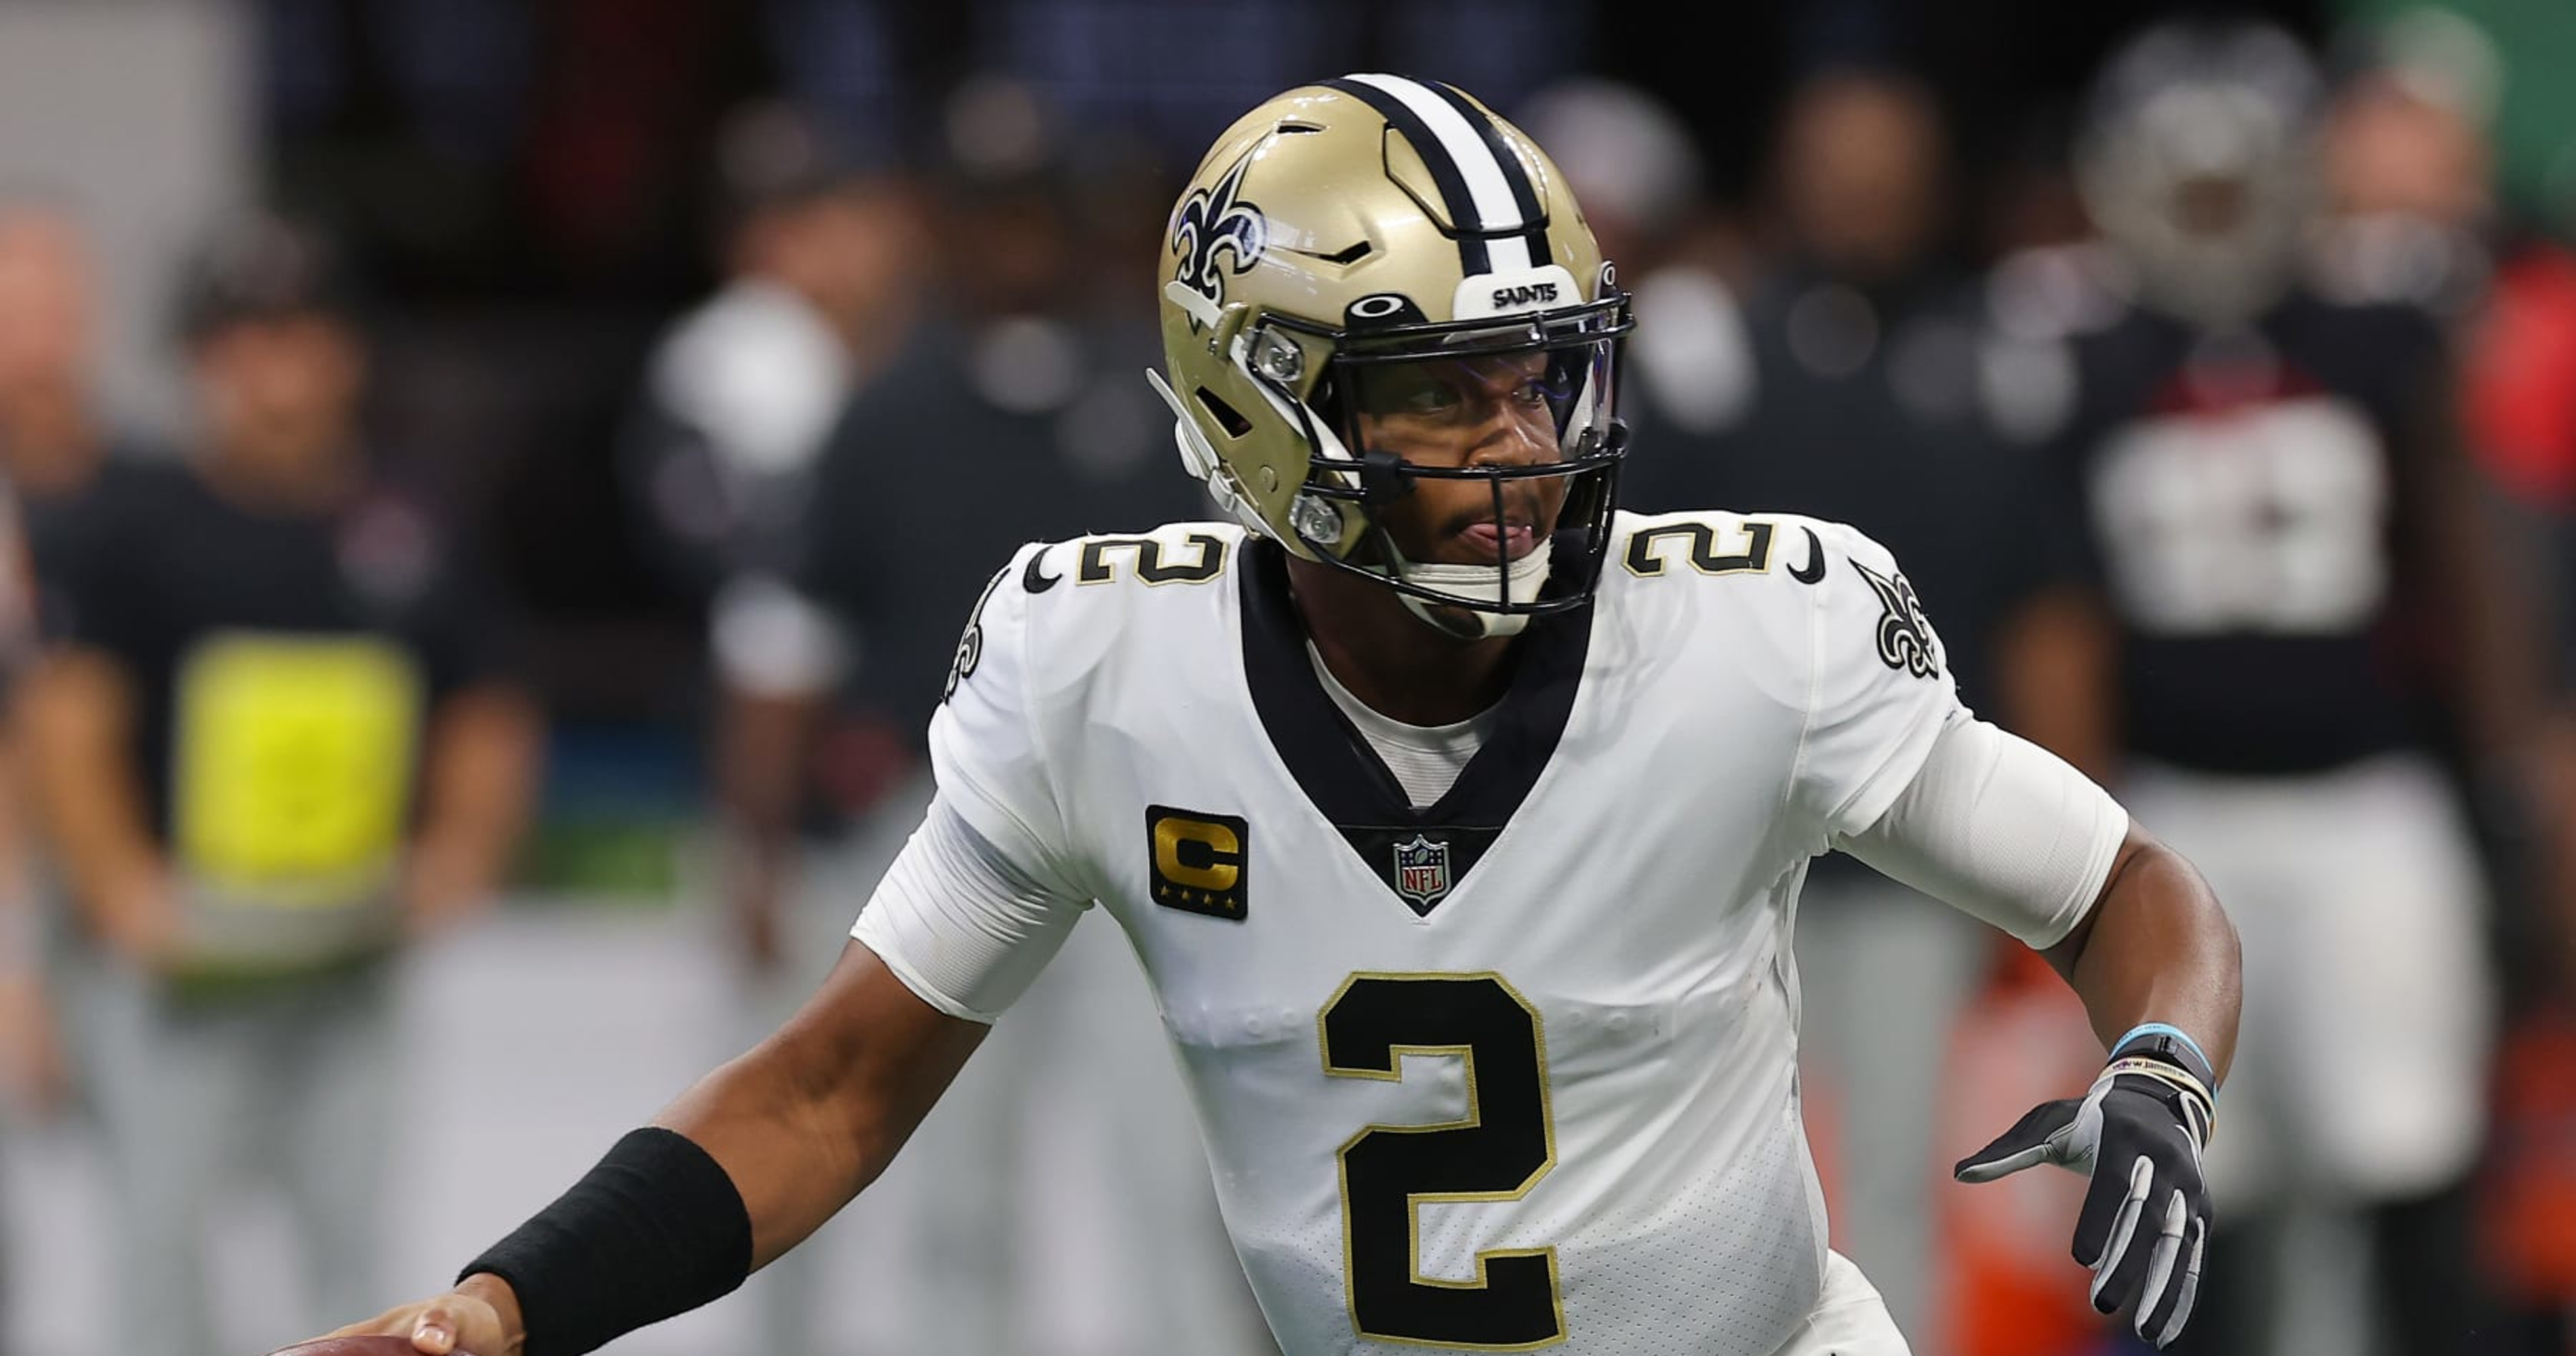 Glazer: Saints QB Jameis Winston Has 4 Fractures in Back; No Risk of Further Inj..